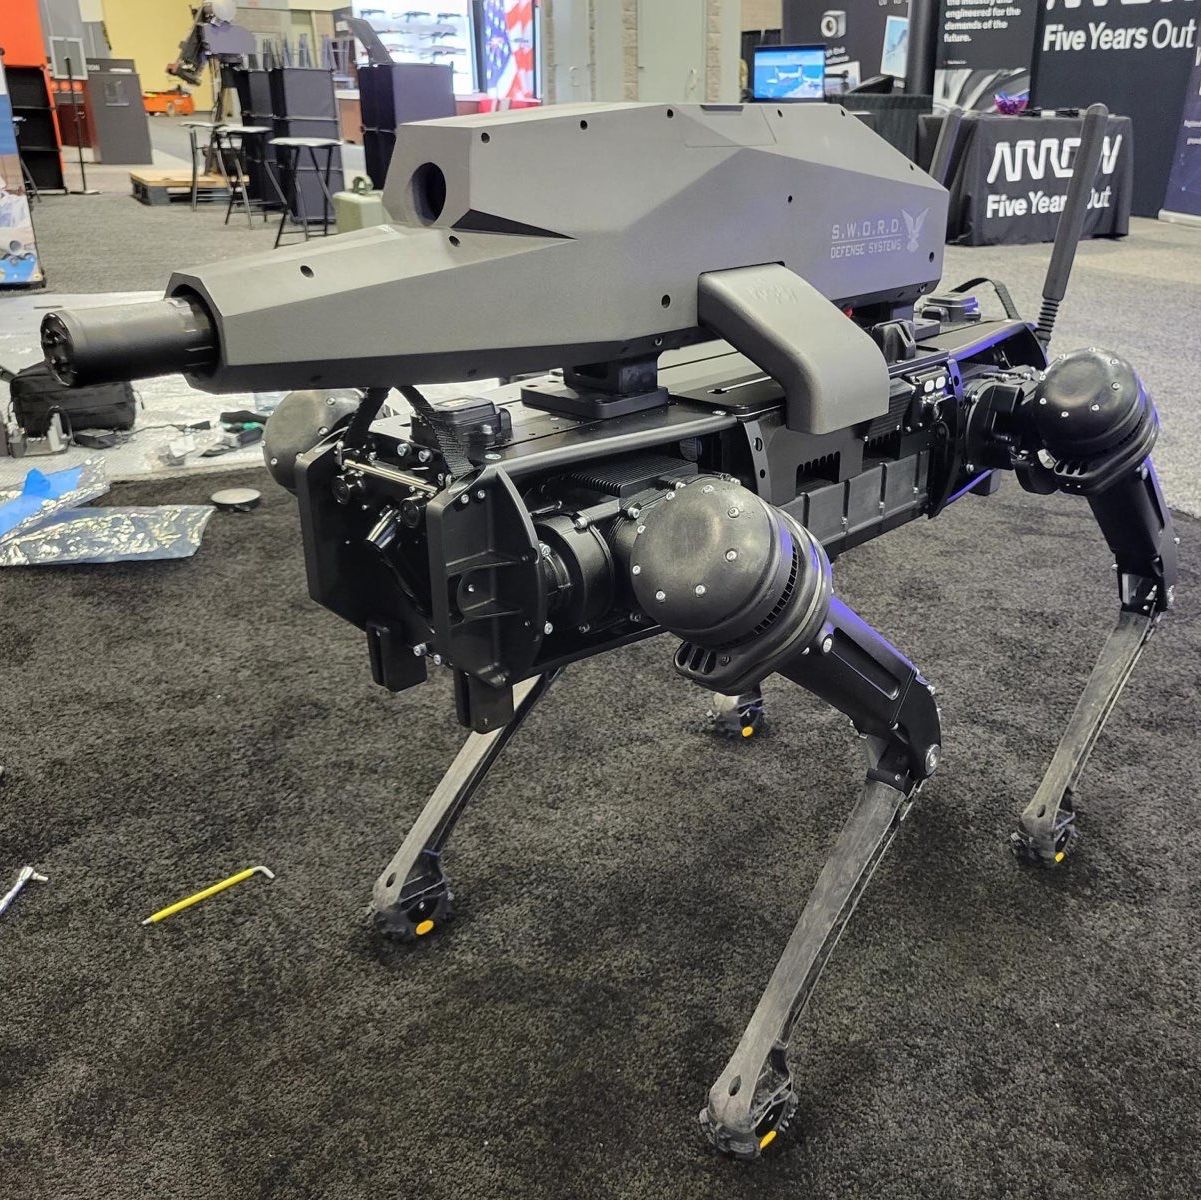 Welp, Now We Have Robo-Dogs With Sniper Rifles